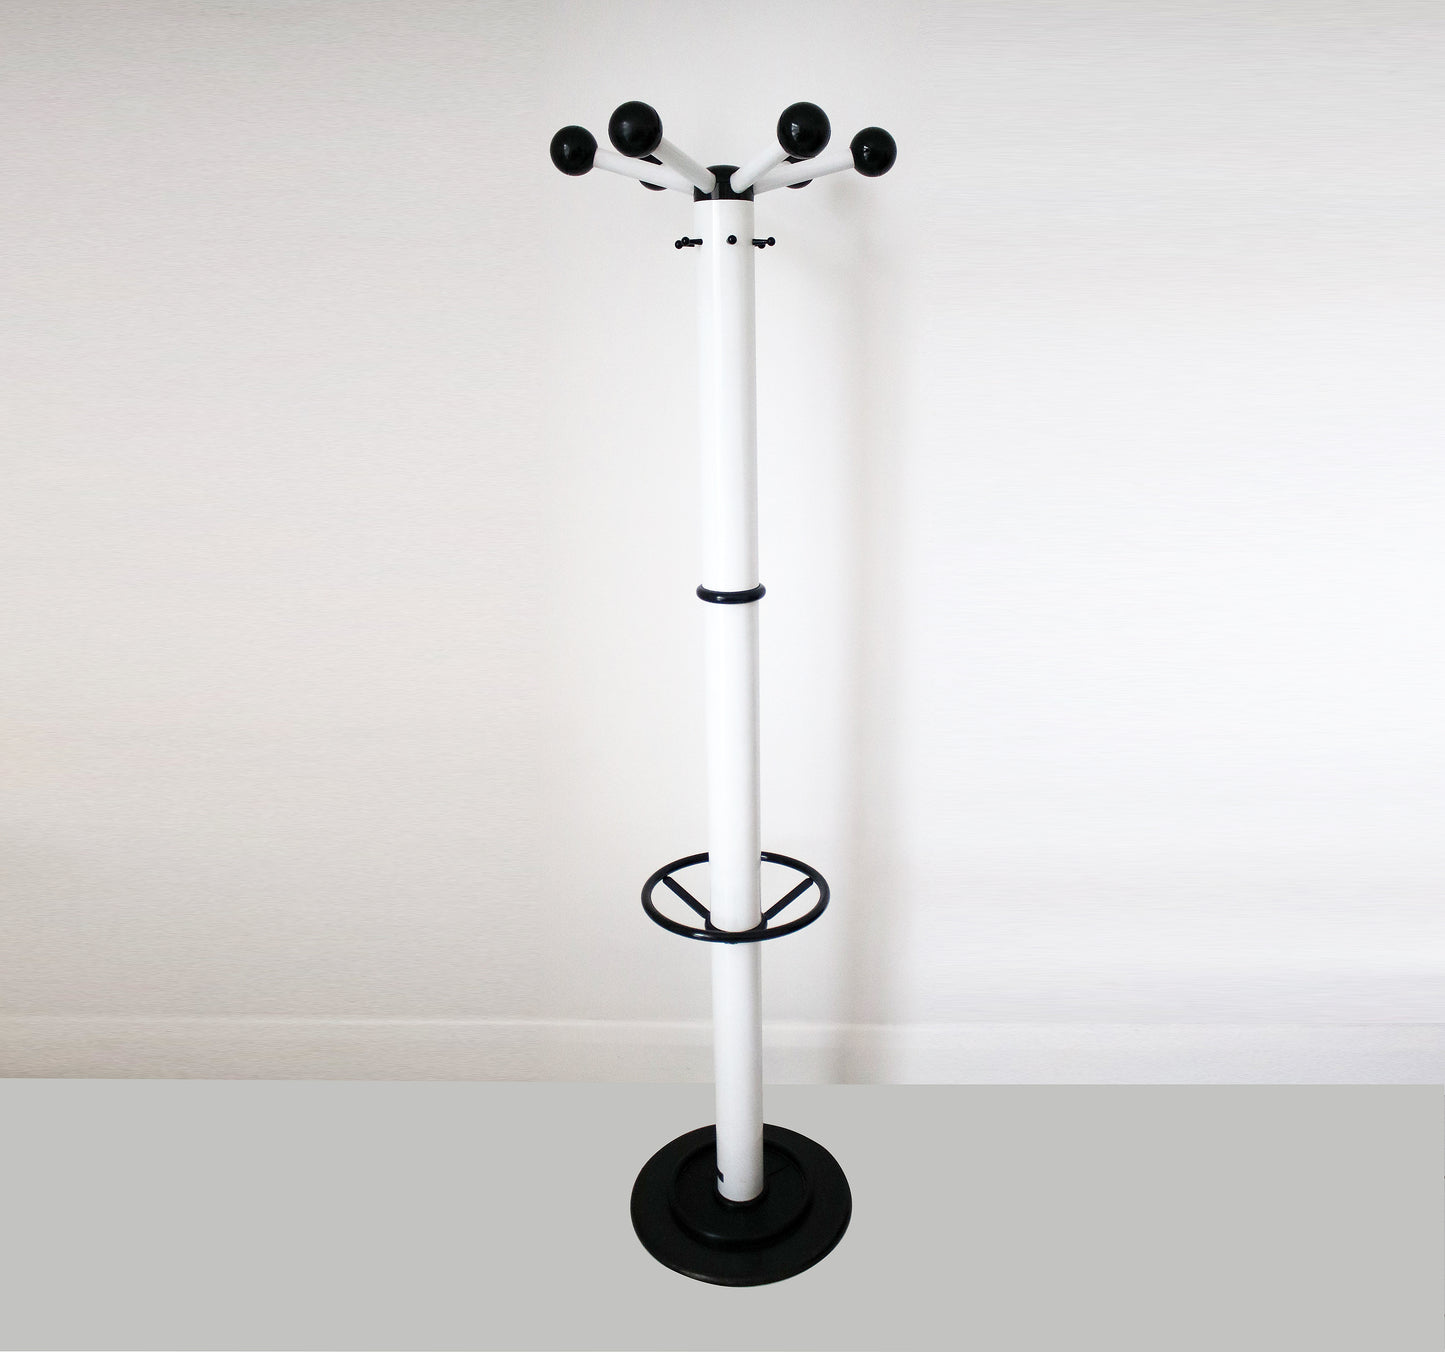 1970s Italian space-age coat stand from Caimi Brevetti